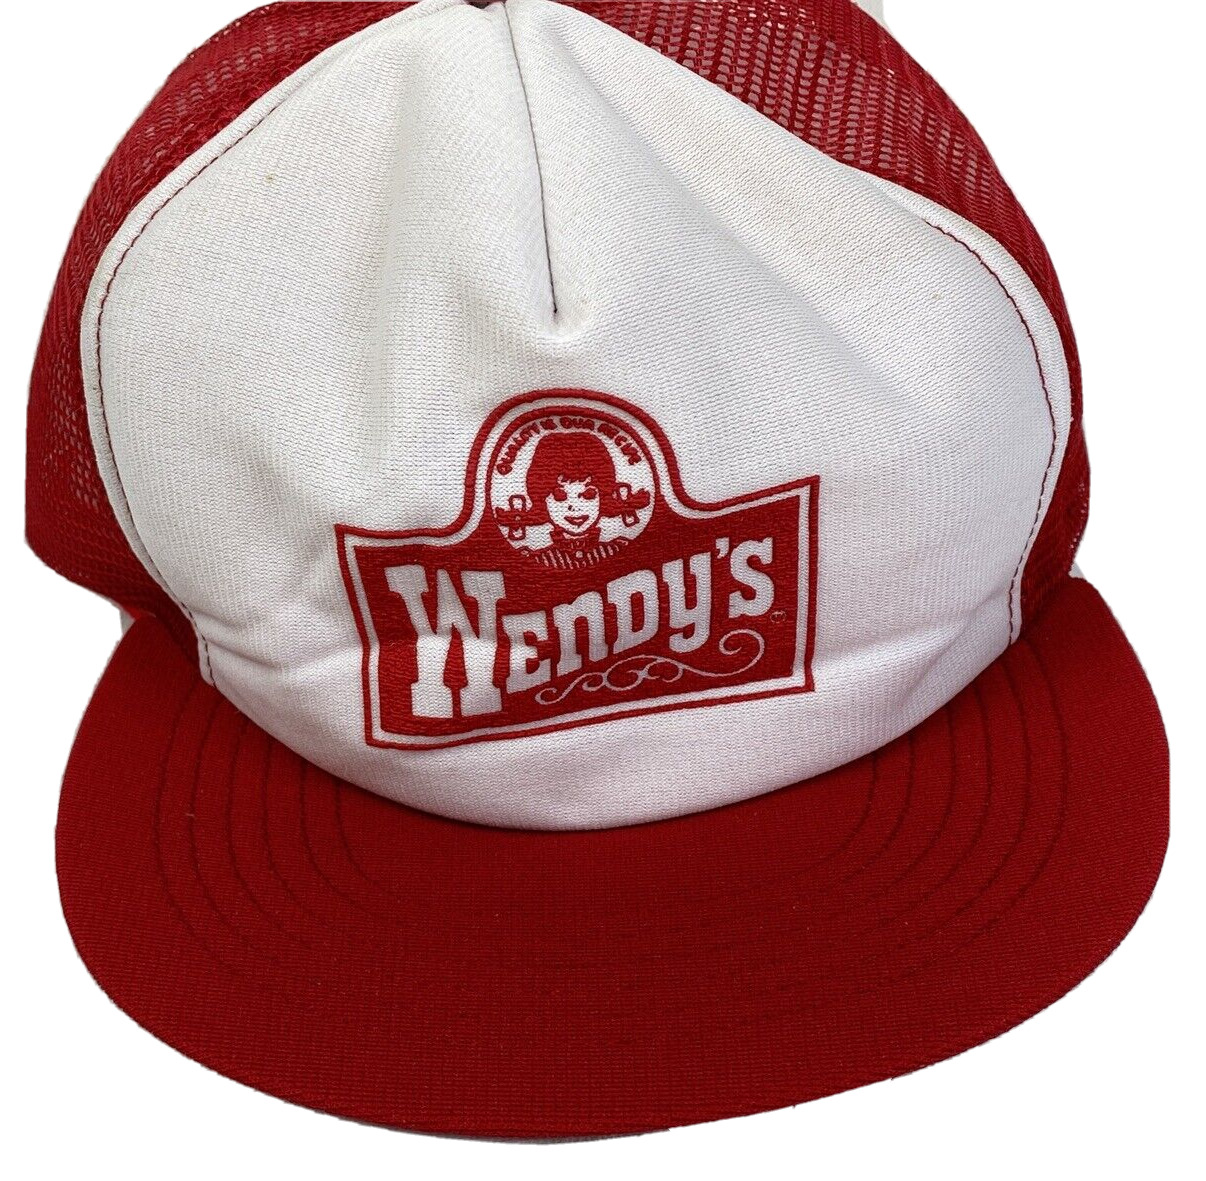 Vintage Wendy\'s Baseball Cap Hat Made in USA Red & White - Office-P3